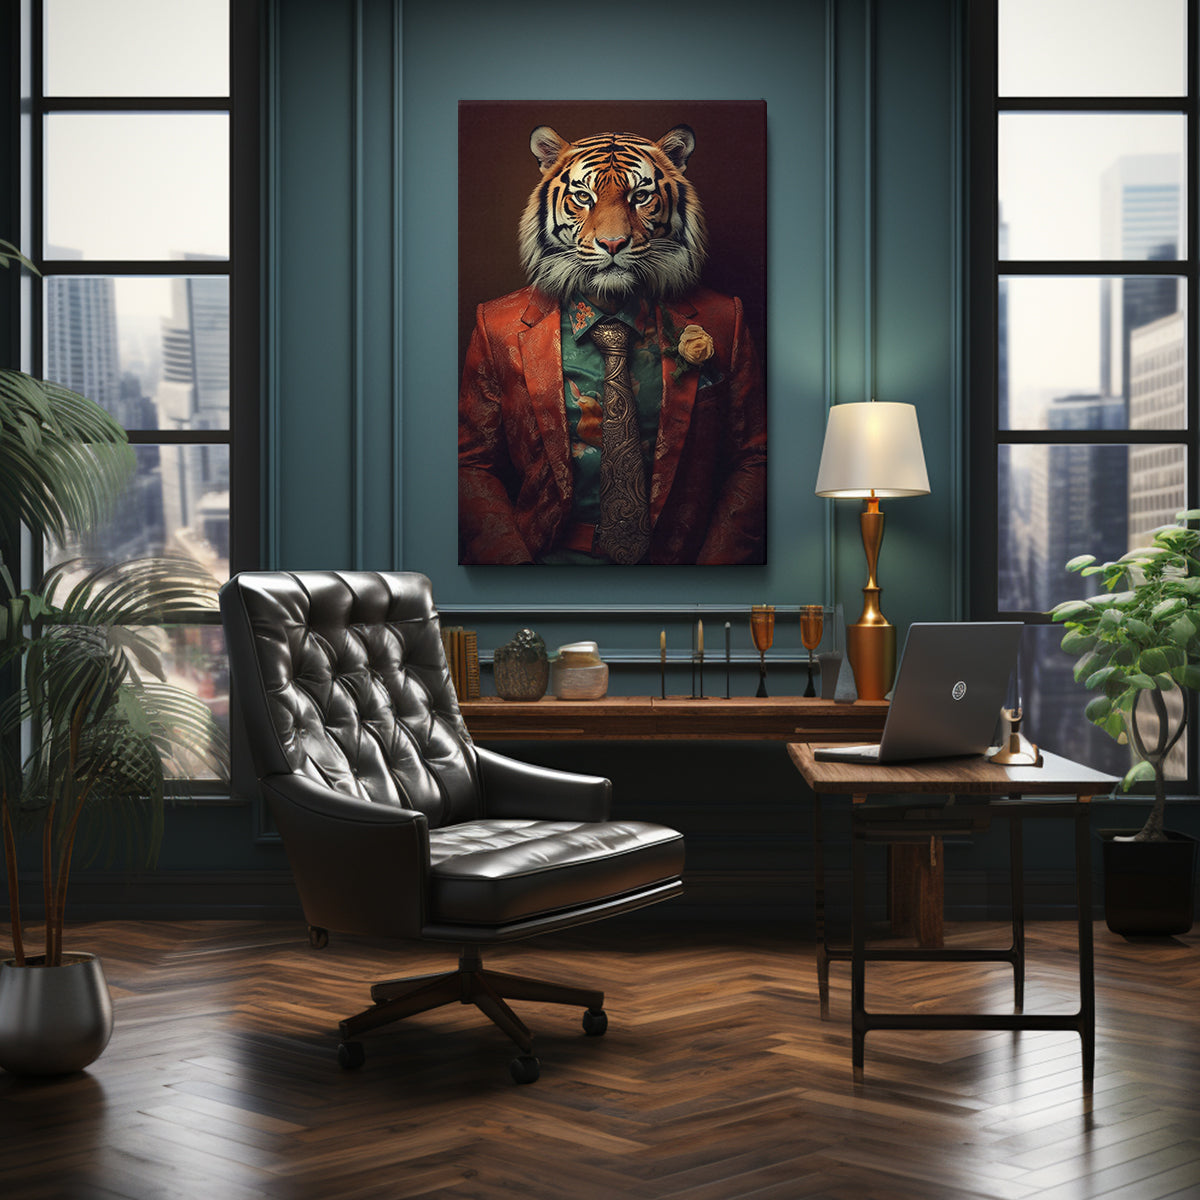 Charming Tiger Gentleman for Office Canvas Prints Artesty 1 Panel 24"x36" 